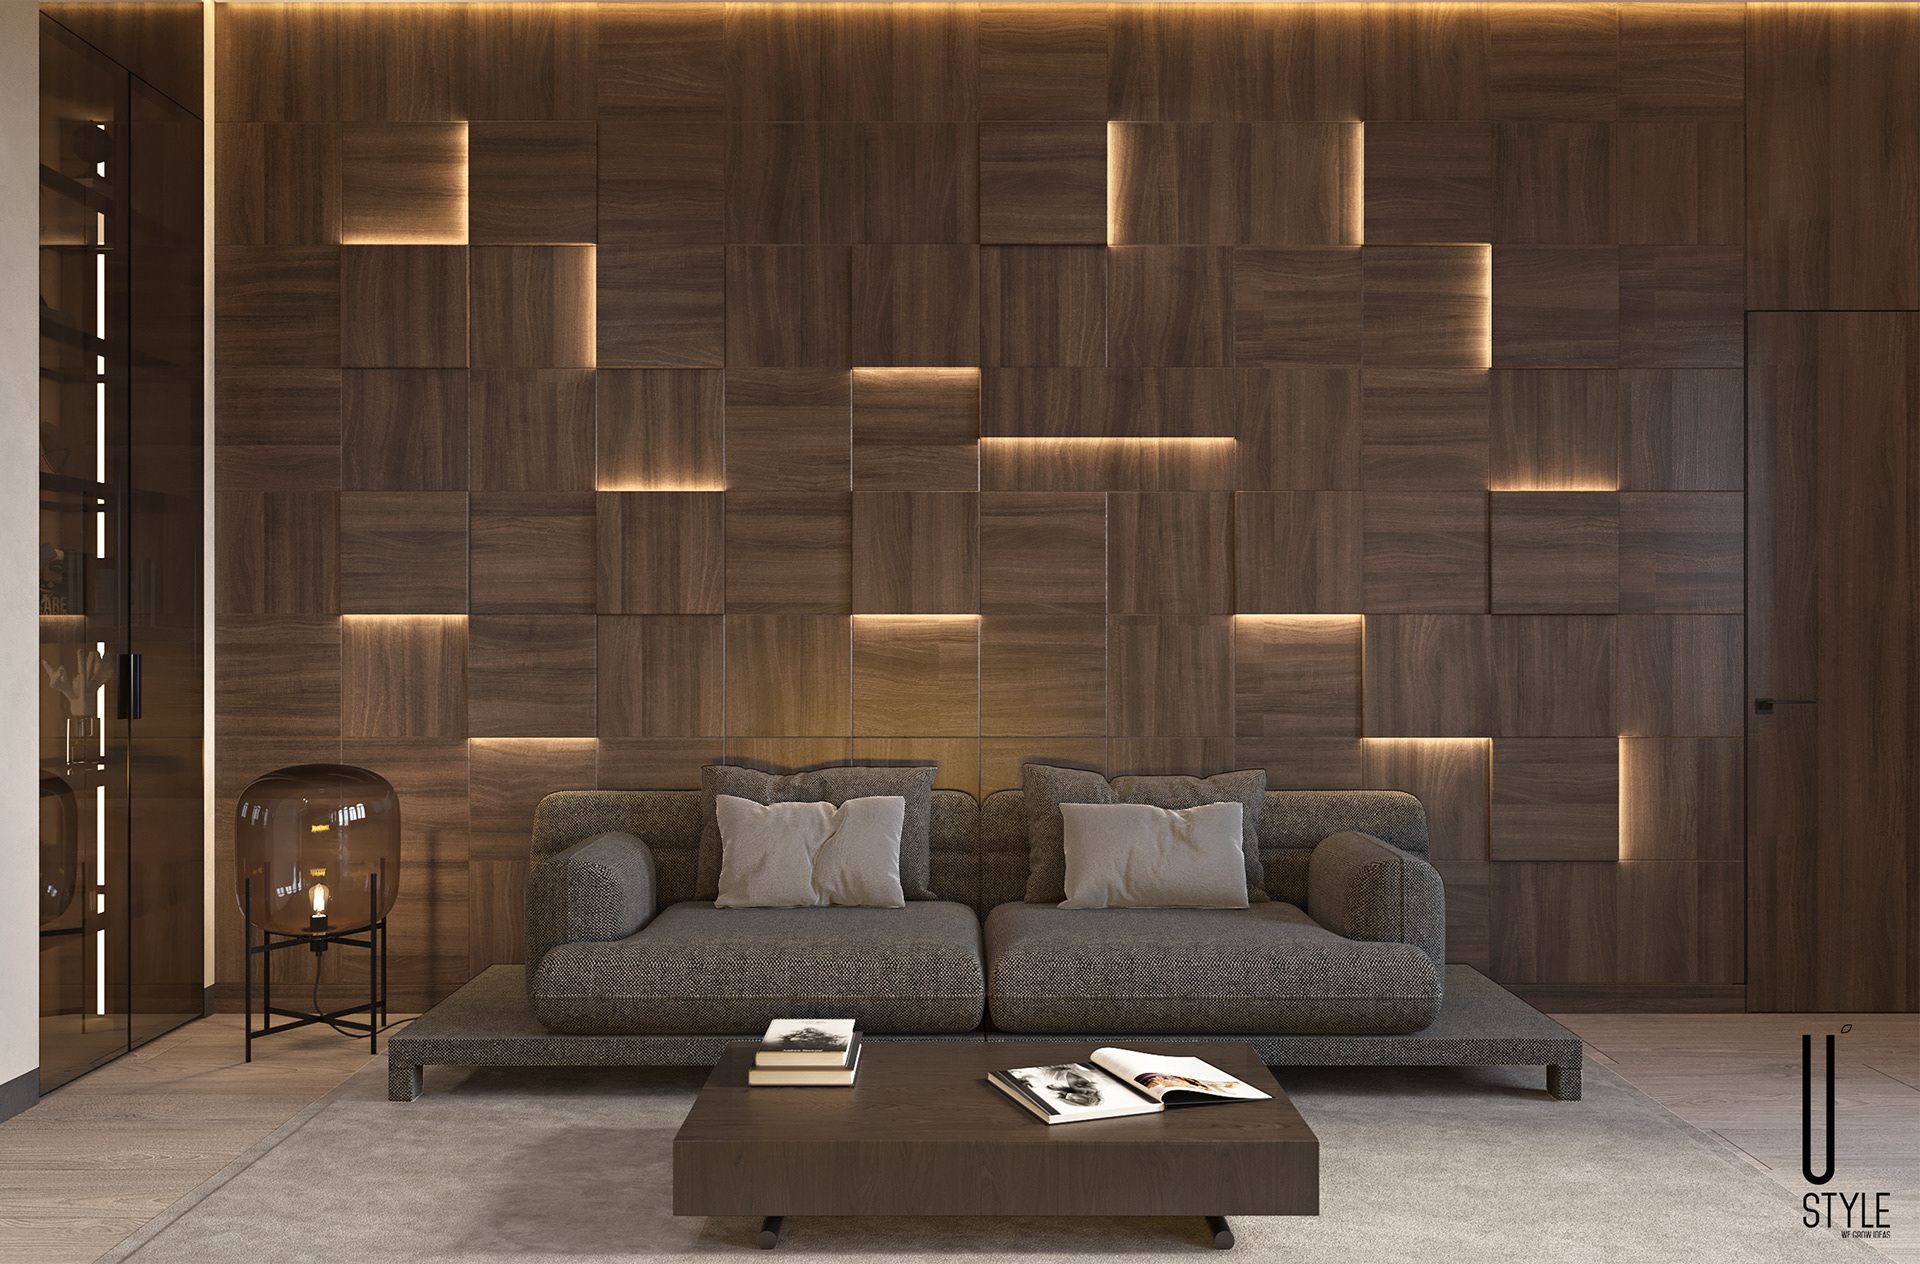 Texture In Interior Design: What Is Its Role And How To Use It